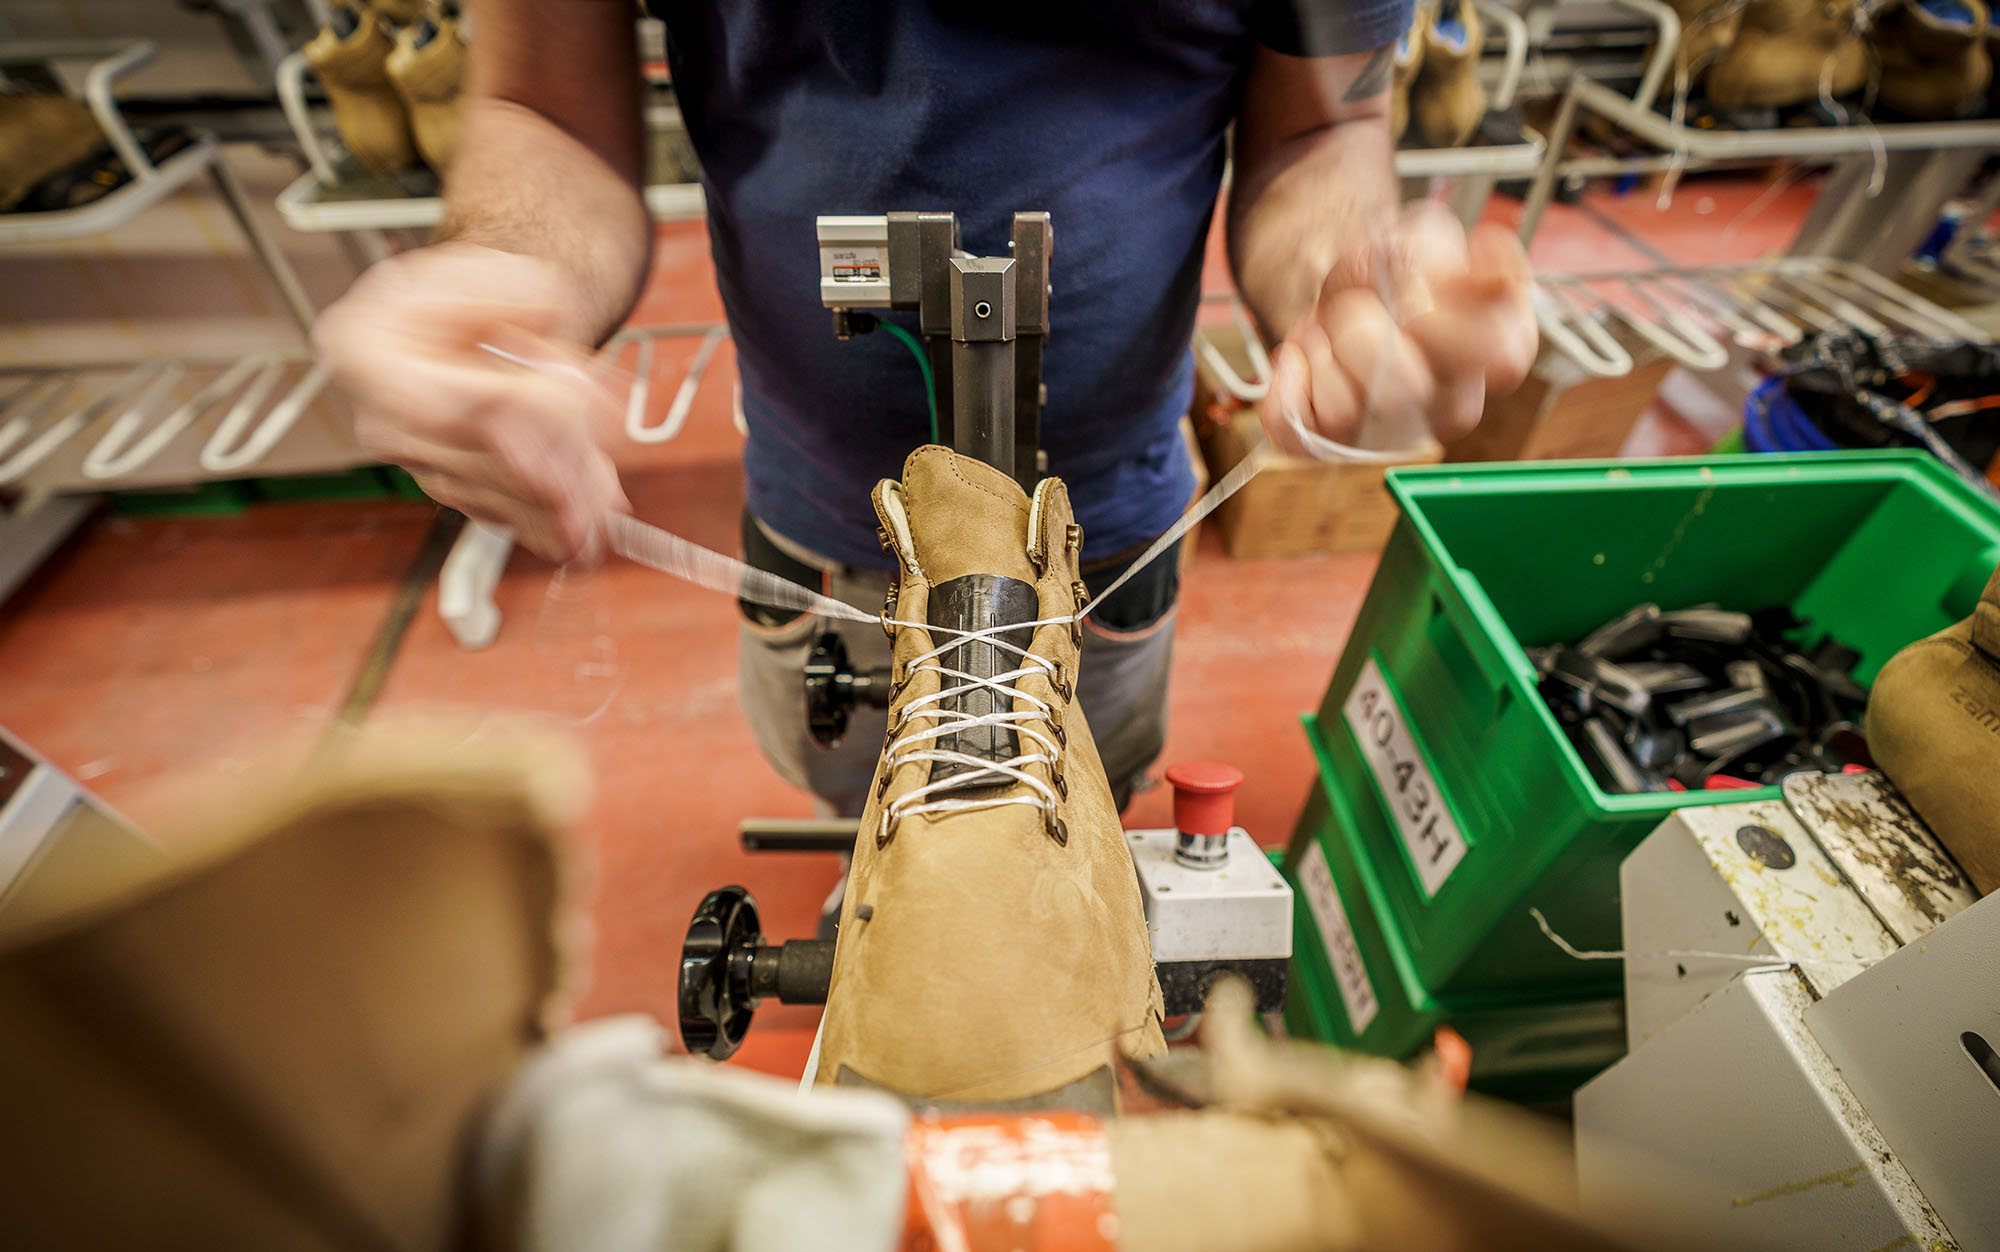 The “last” of a hiking boot—the form around which the boot is fitted—varies widely from boot to boot. The best way to find your perfect fit is to try a variety of different models from different brands.